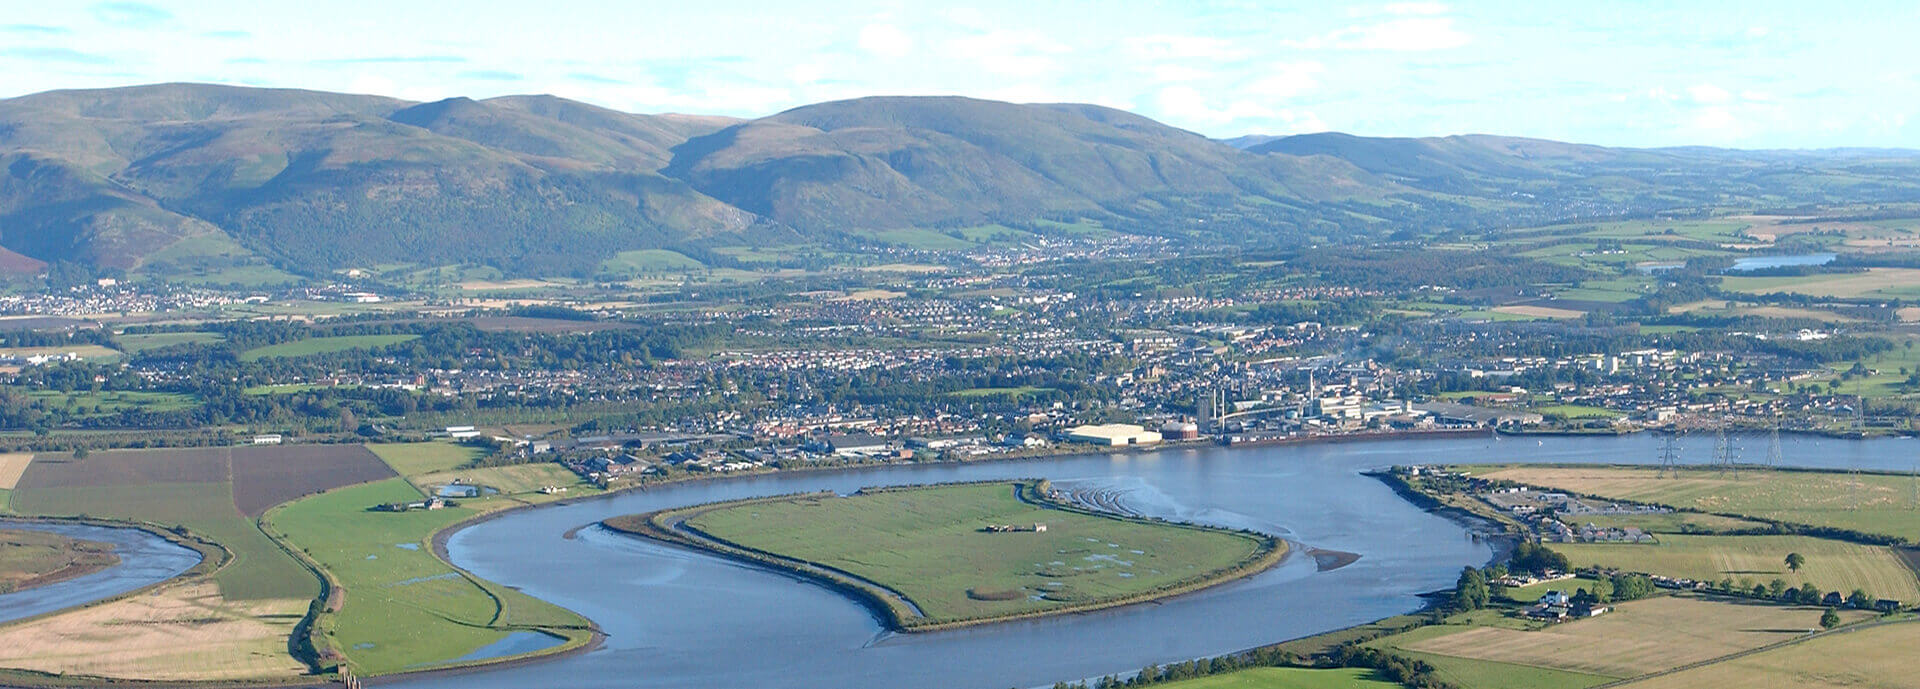 From the air view of Forth Valley and Clackmannanshire